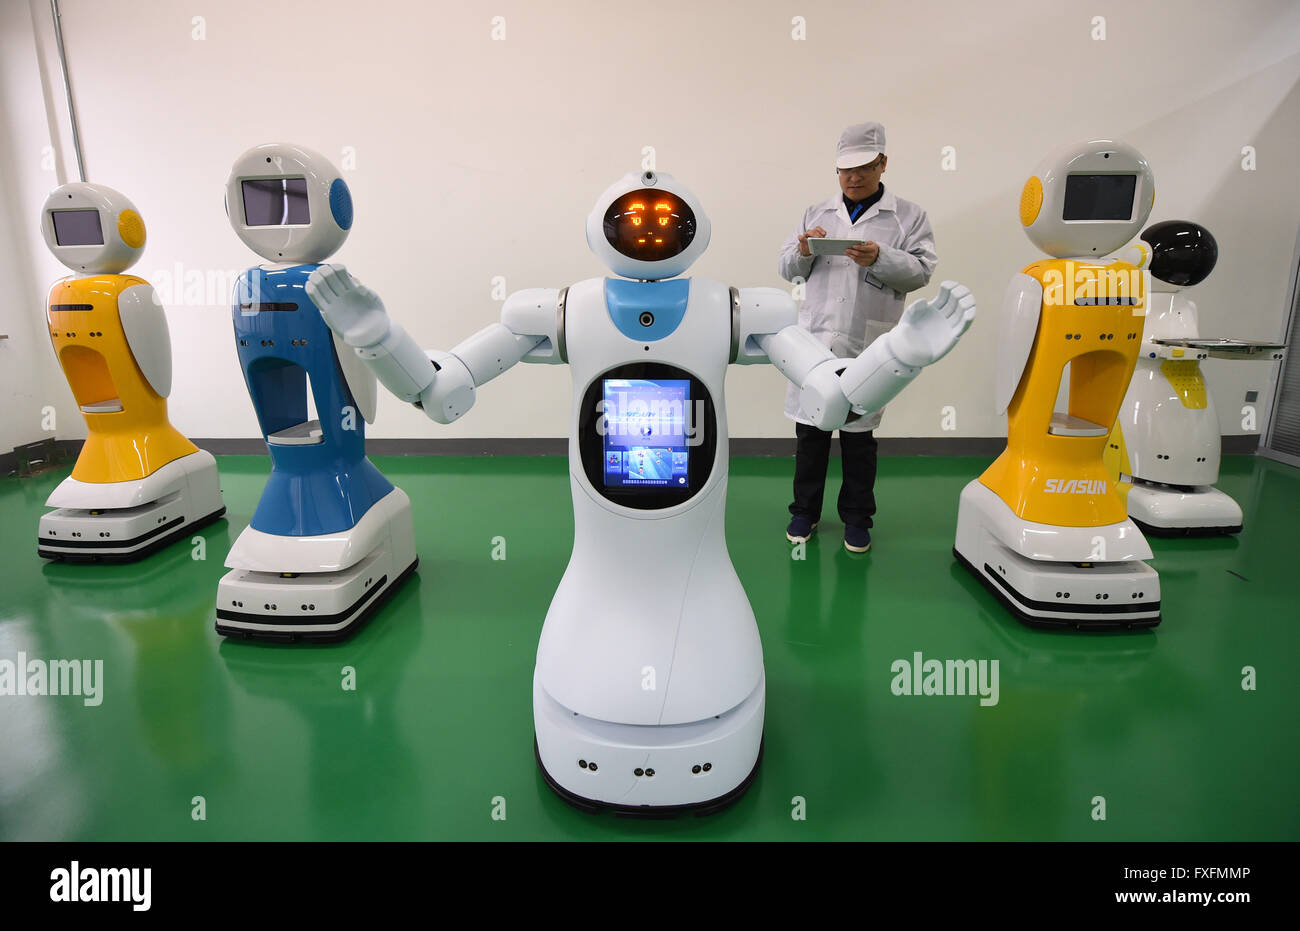 Shenyang, China's GDP stood at 15.9 trillion RMB yuan (2.4 trillion USA dollars) in the first quarter this year, growing up by 6.7 percent year on year. 15th Apr, 2016. A worker tests robots before putting them into the market at a factory of Siasun Robot and Automation Co., Ltd. in Shenyang, capital of northeast China's Liaoning Province, April 12, 2016. China's GDP stood at 15.9 trillion RMB yuan (2.4 trillion U.S. dollars) in the first quarter this year, growing up by 6.7 percent year on year, the National Bureau of Statistics said on April 15, 2016. © Pan Yulong/Xinhua/Alamy Live News Stock Photo